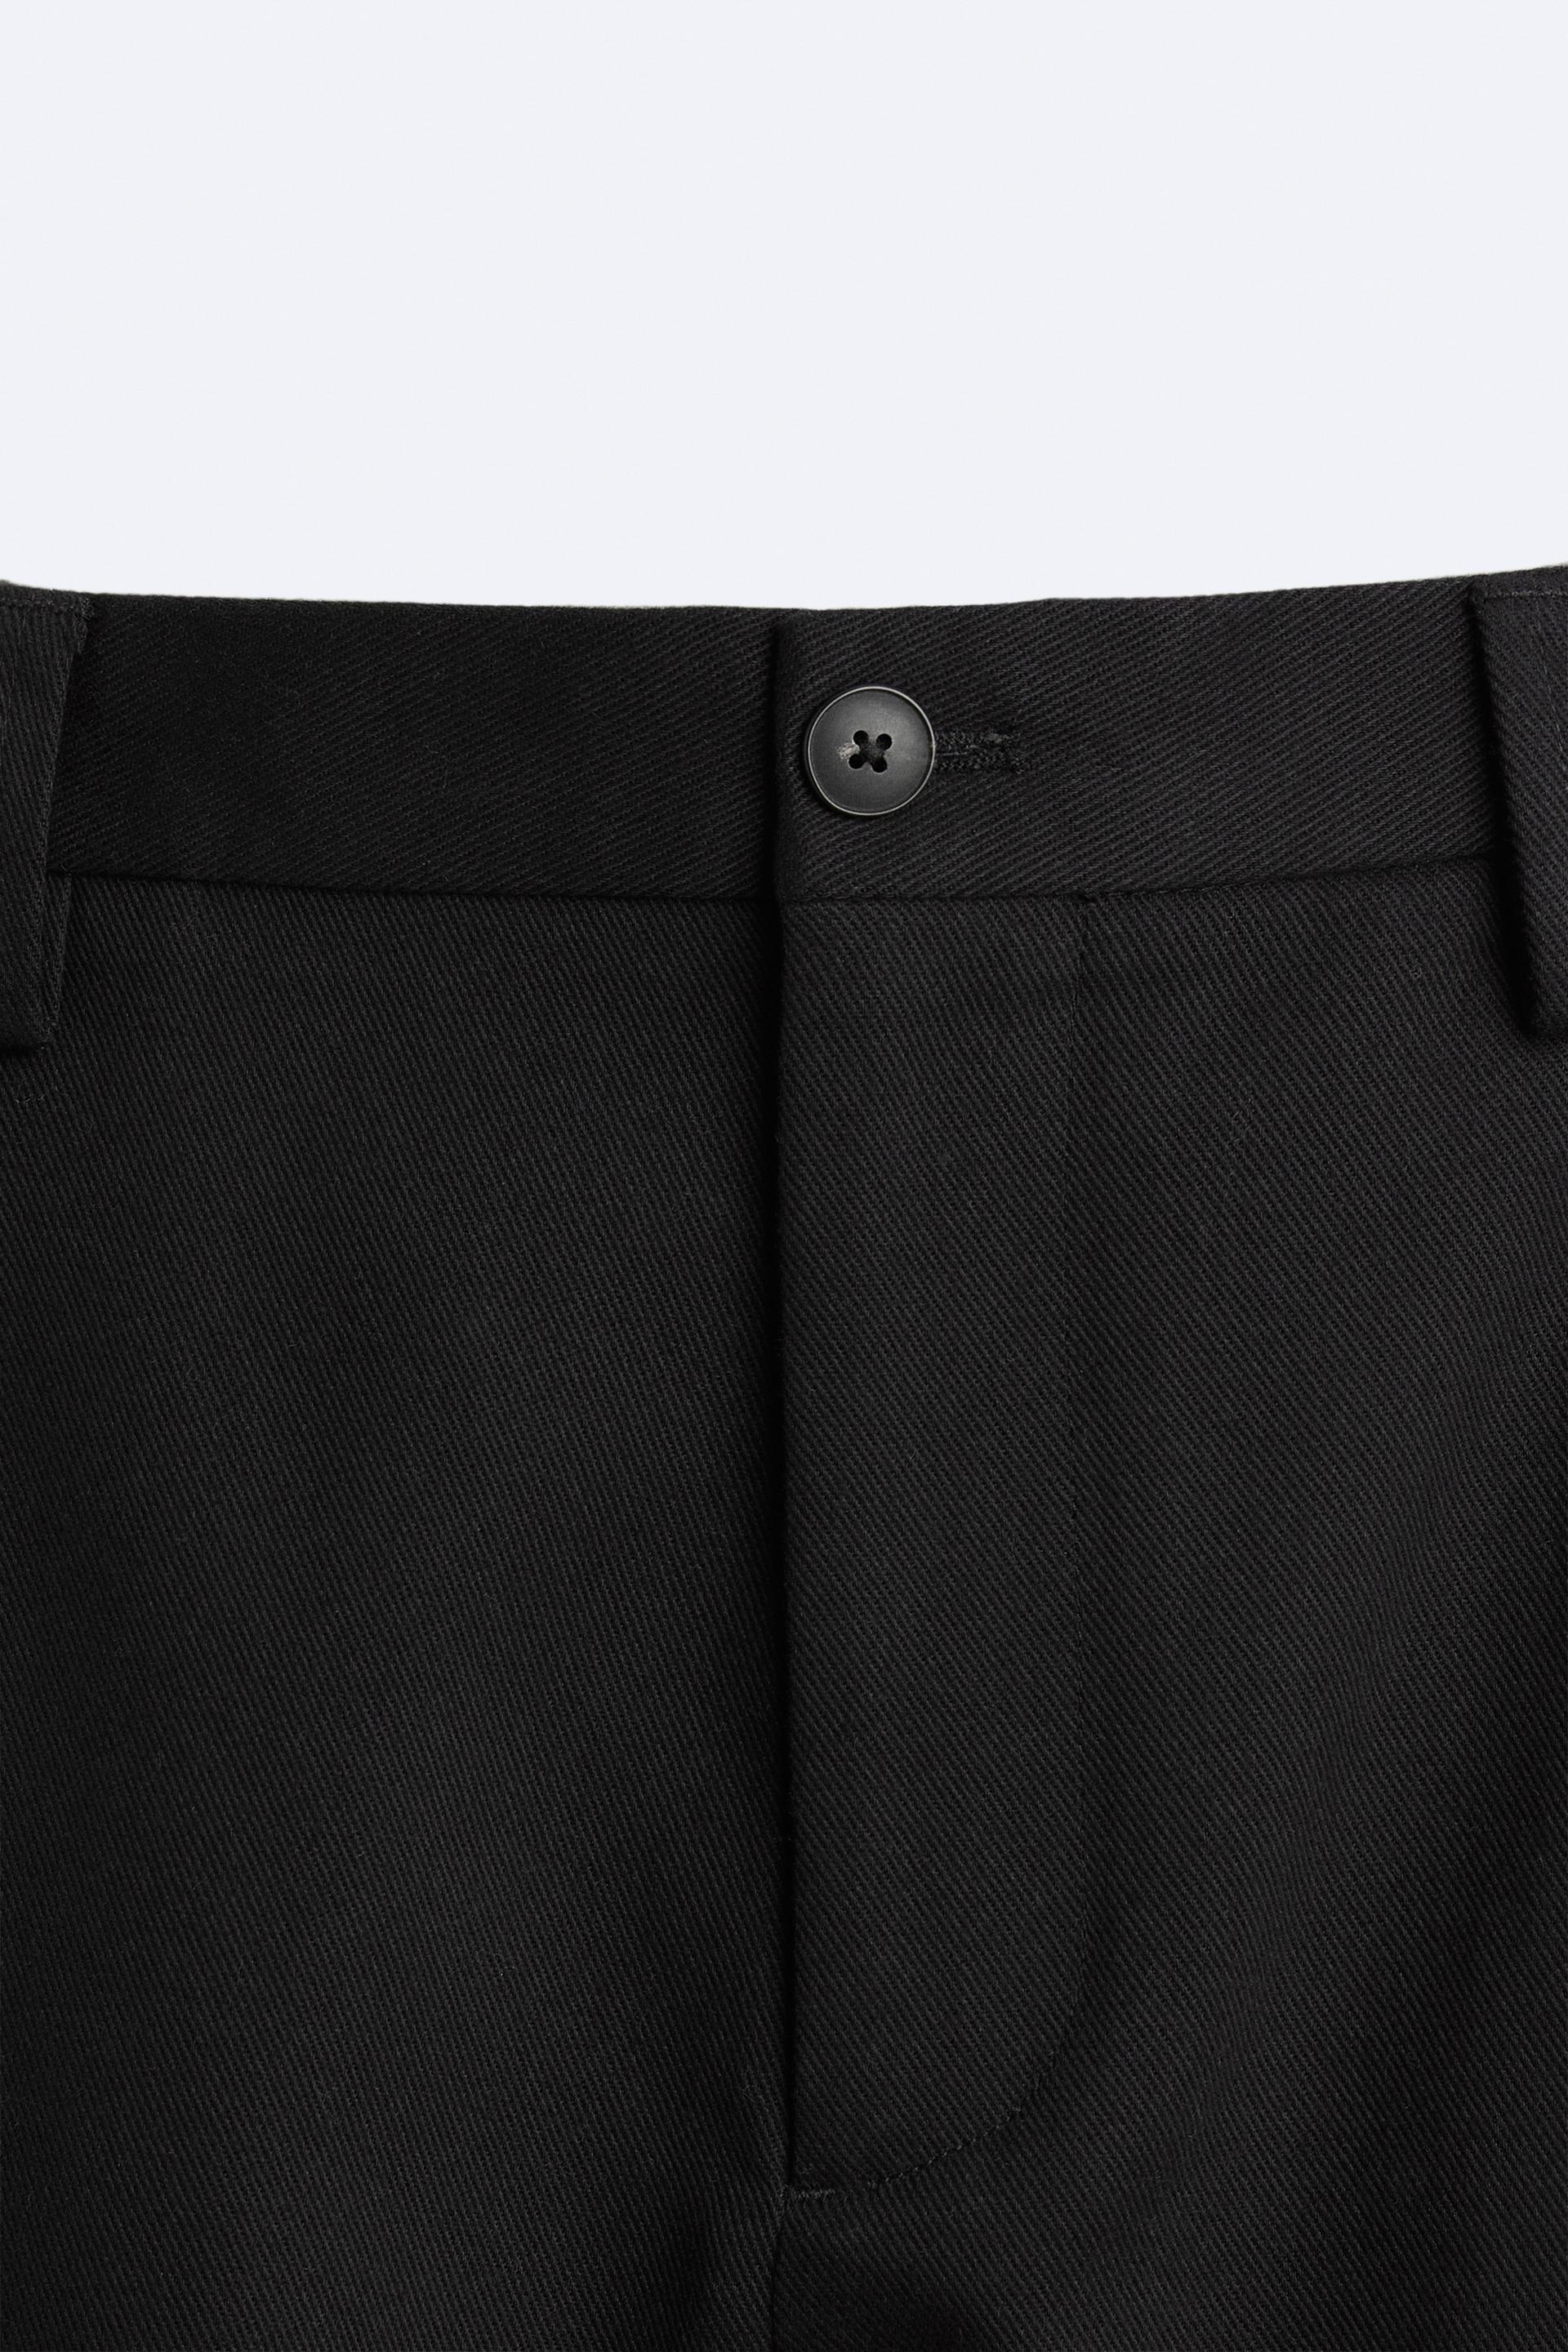 TWILL STRUCTURED PANTS - Black